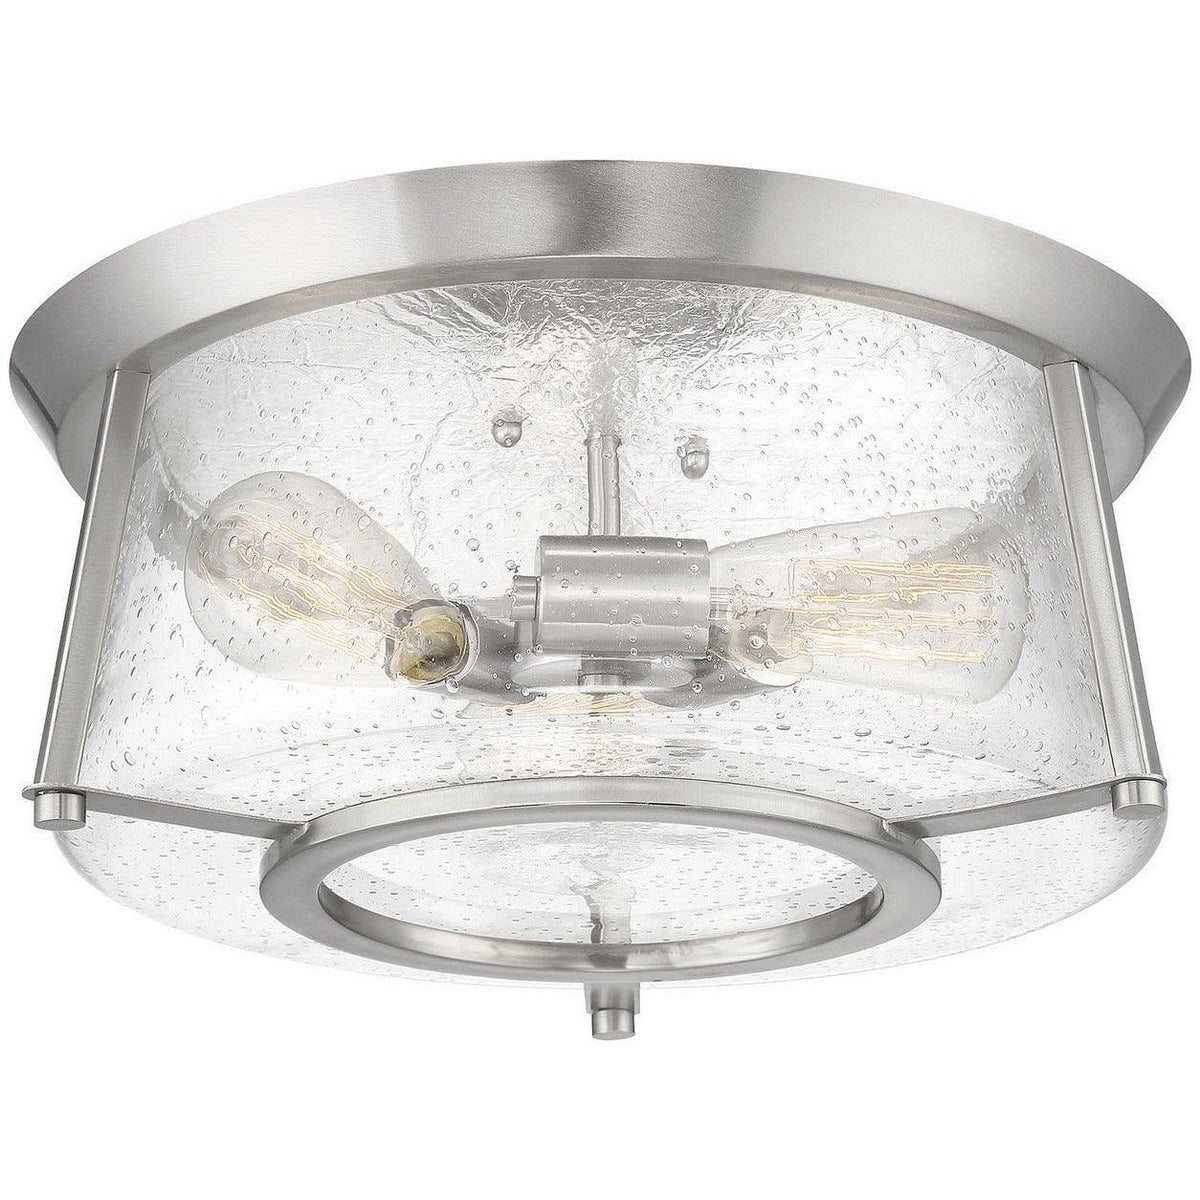 Savoy-House---6-1685-1-142---Gavin---1-Light-Semi-Flush-Mount -In-VIntage-Style-9-Inches-Tall-and-20-Inches-Wide